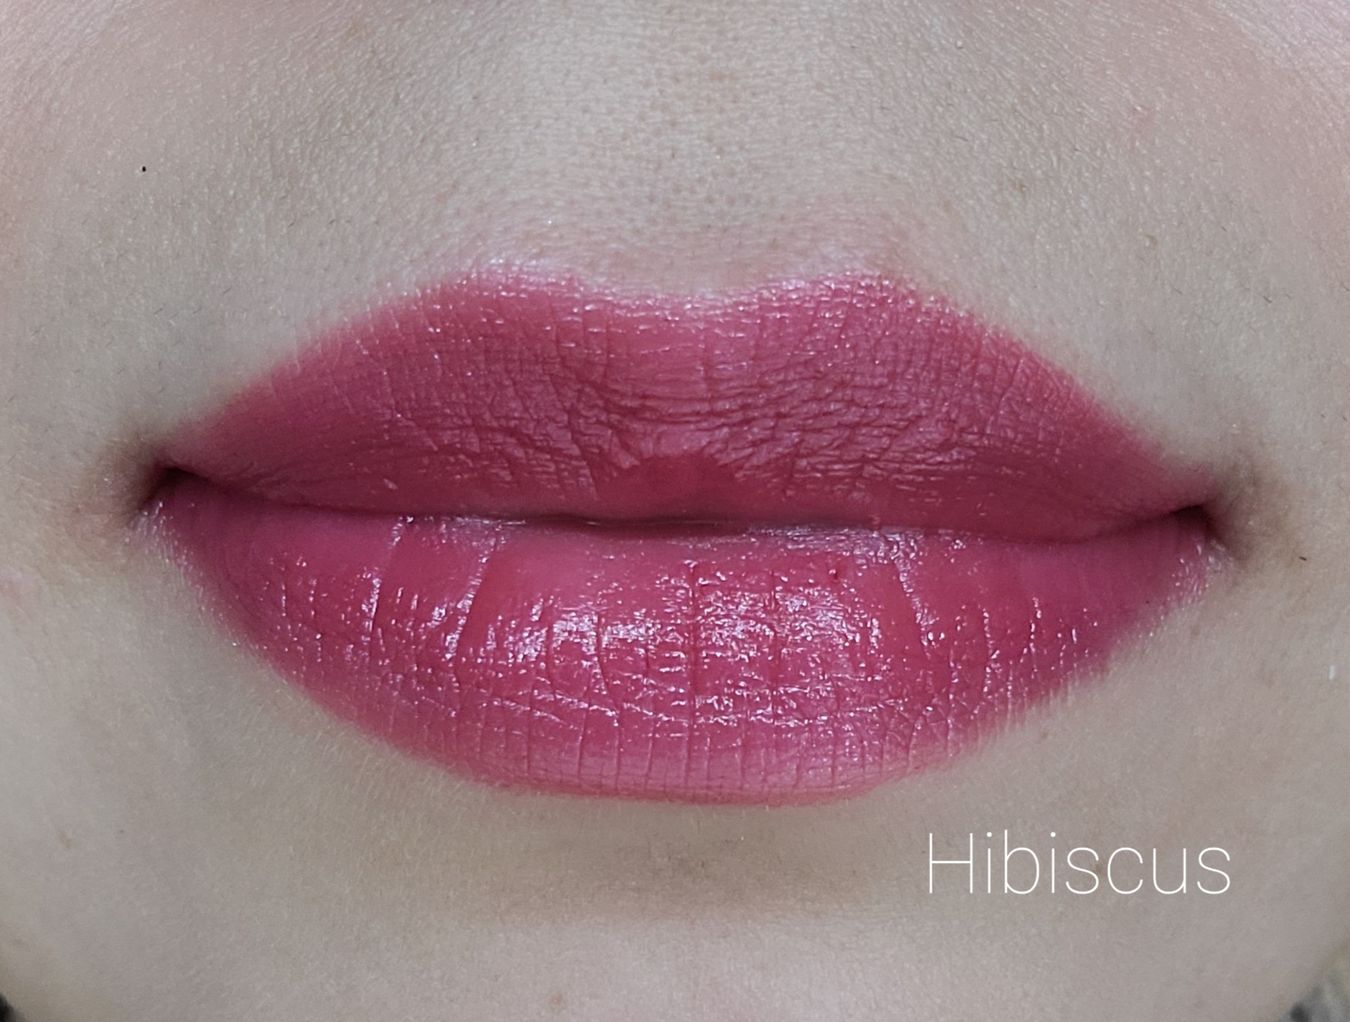 Image of close up lips wearing lipstick in the shade called Hibiscus. This is a berry pink color with just a hint of red.